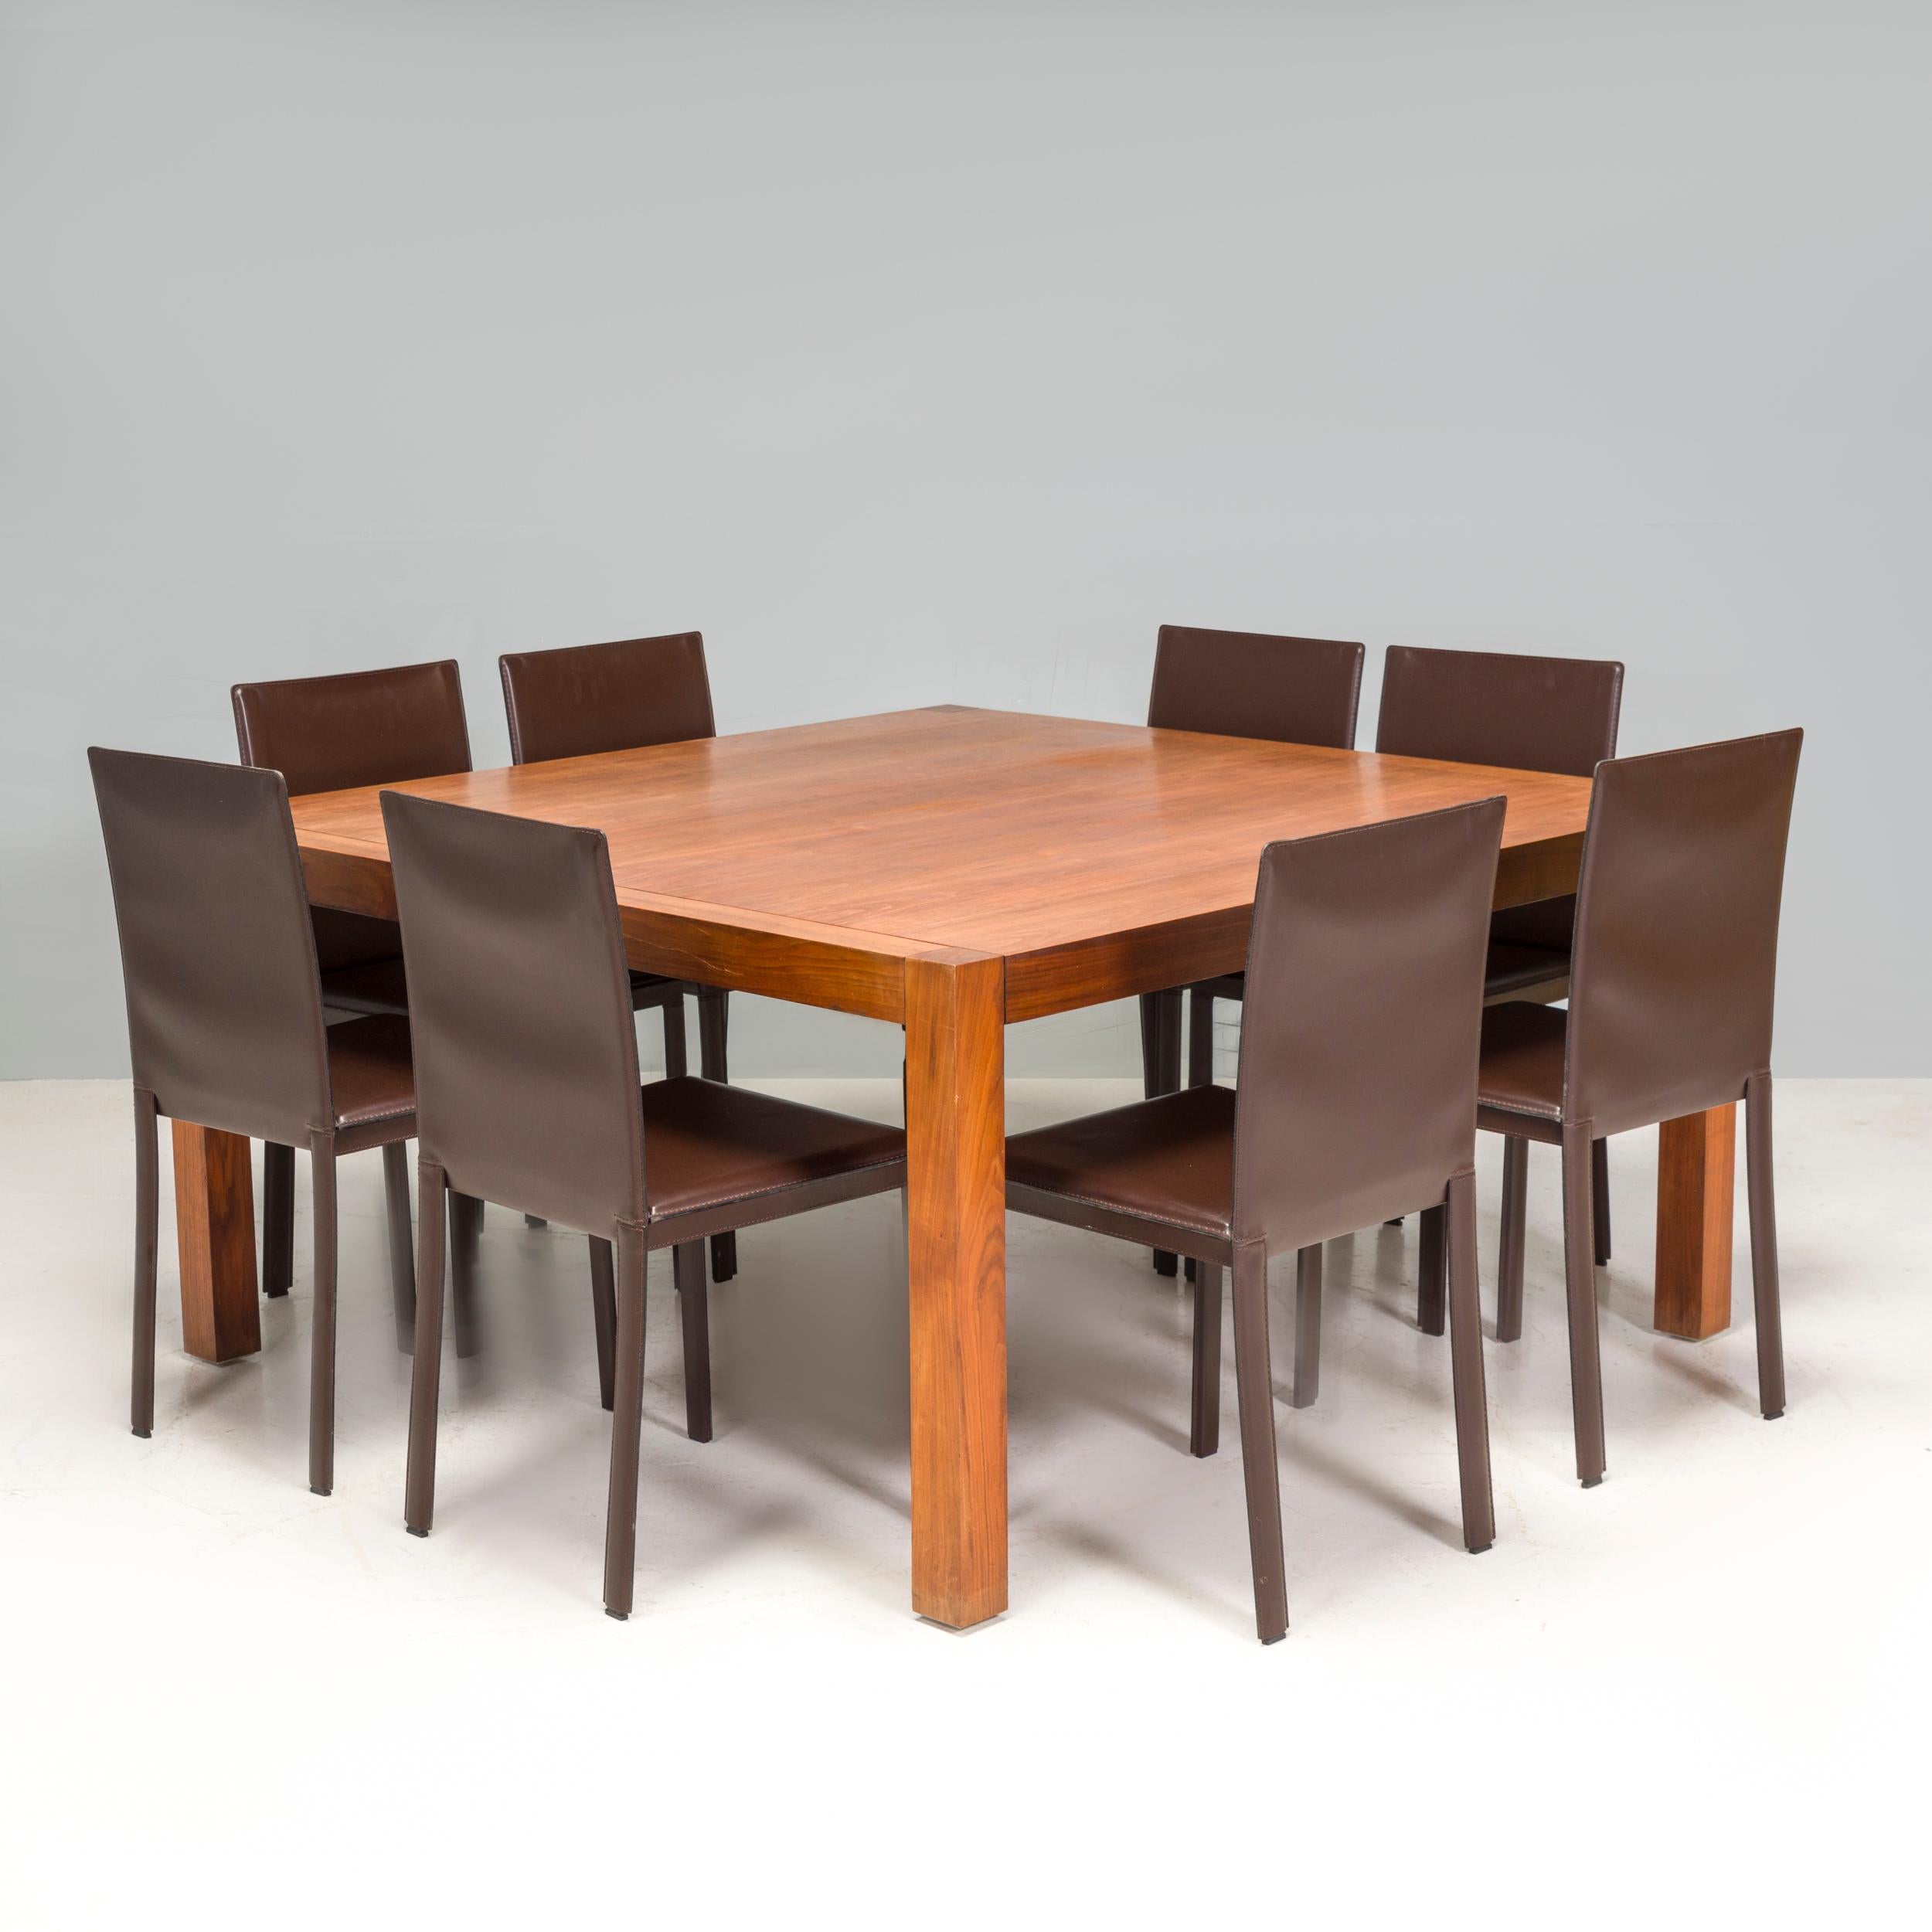 Italian Riva 1920 Square Oak Dining Table In Good Condition For Sale In London, GB